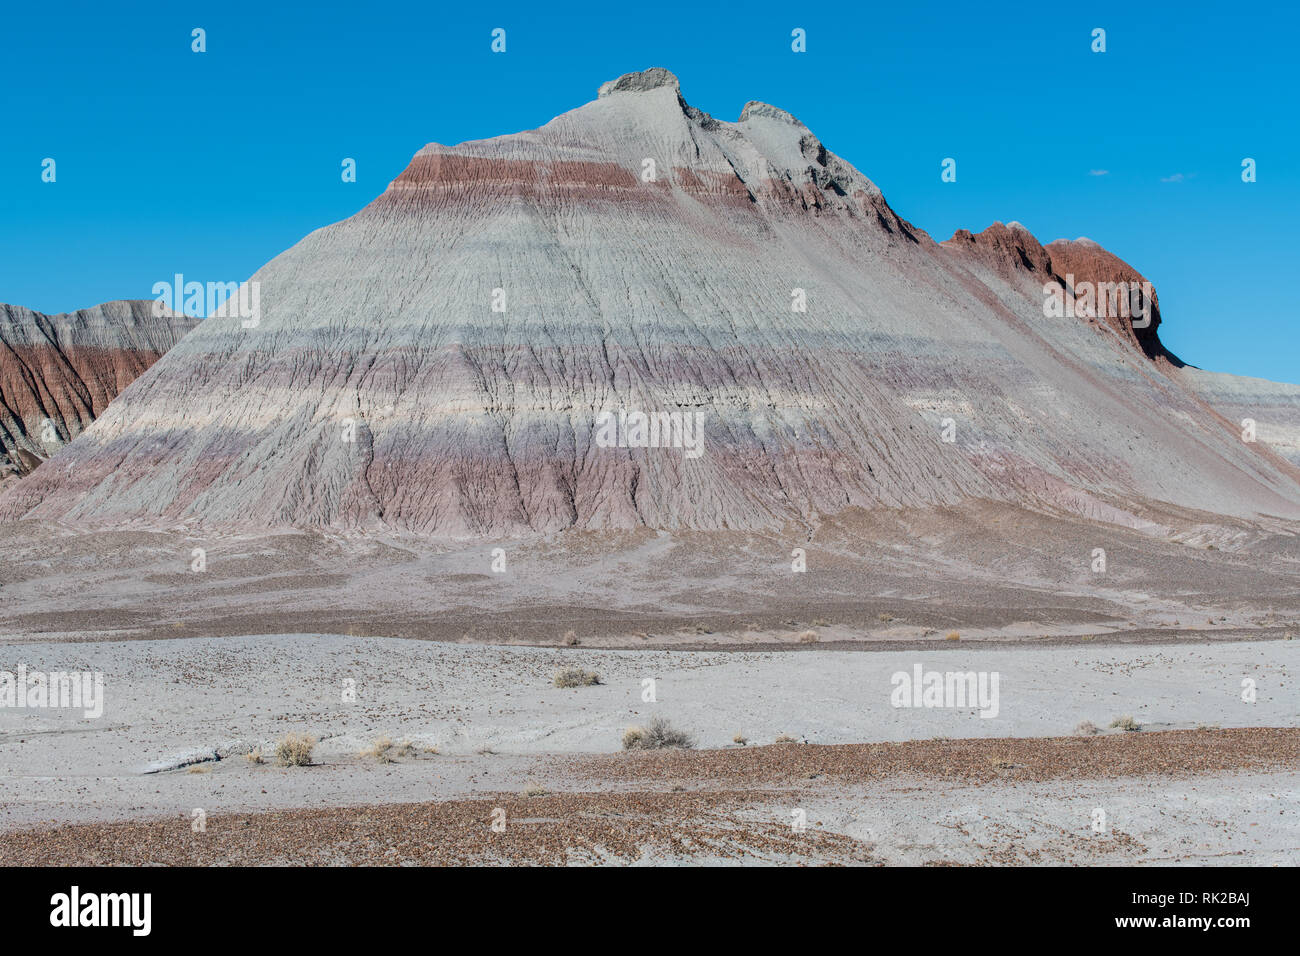 Colorful, barren desert rock formation with red, orange, and purple strata in Petrified Forest National Park, Arizona Stock Photo